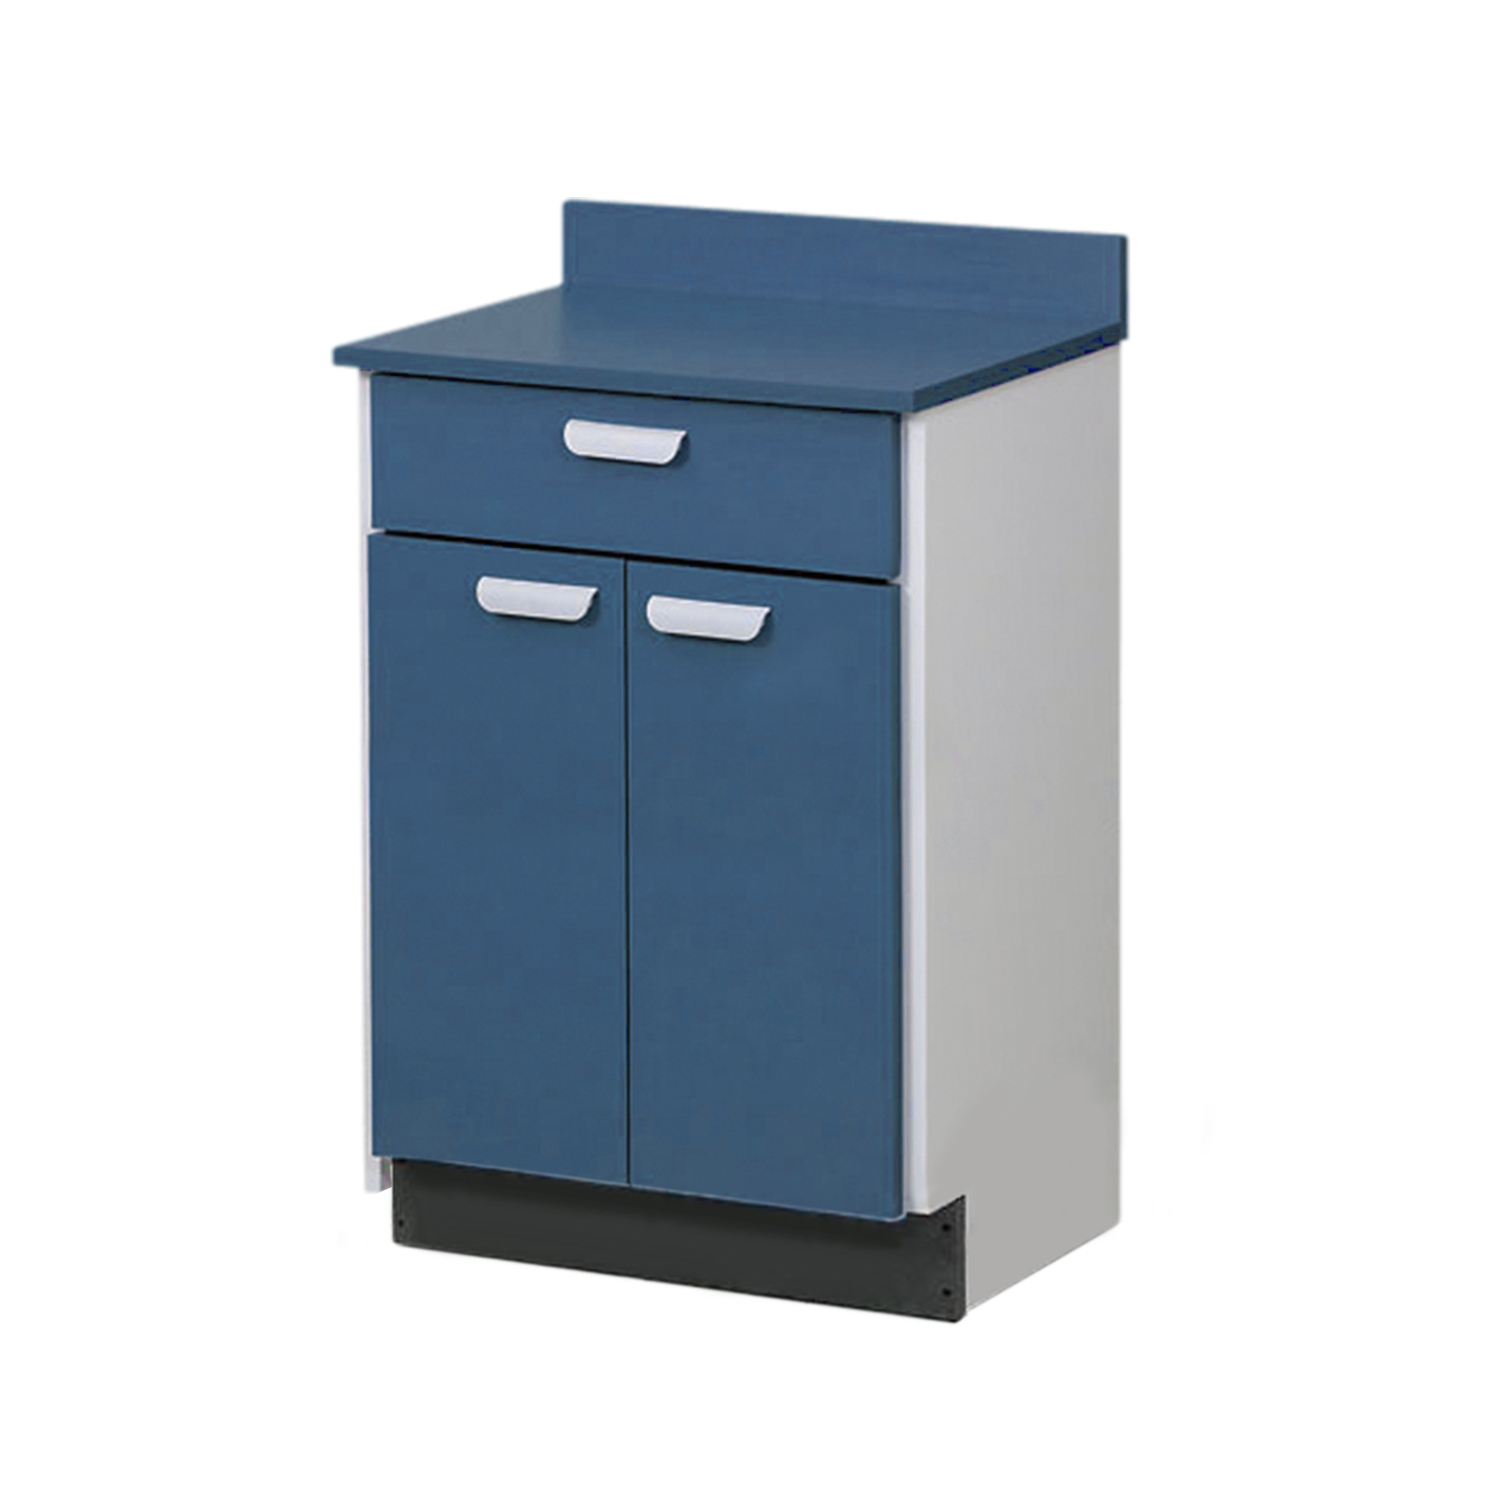 Single Base Cabinet with 2 Doors and 1 Drawer